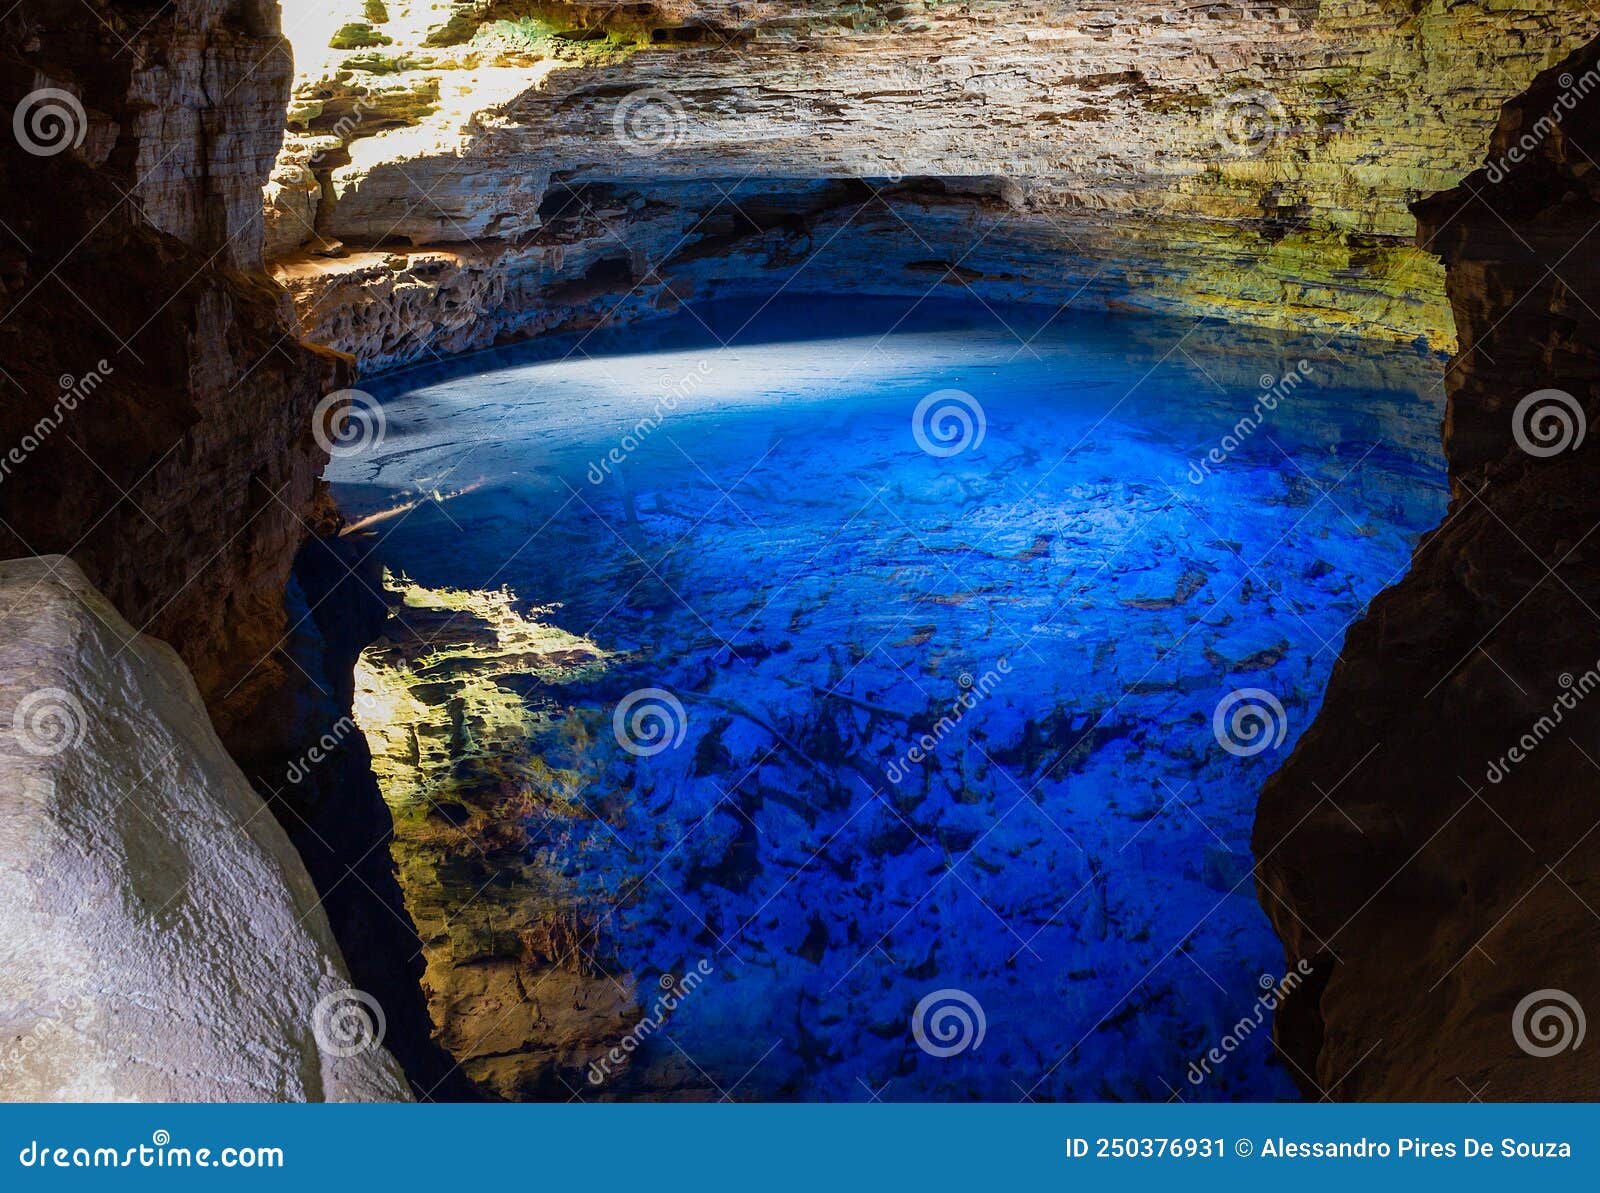 the blue water of poÃÂ§o encantado or enchanted well, in a cave of chapada diamantina national park, bahia, brazil.